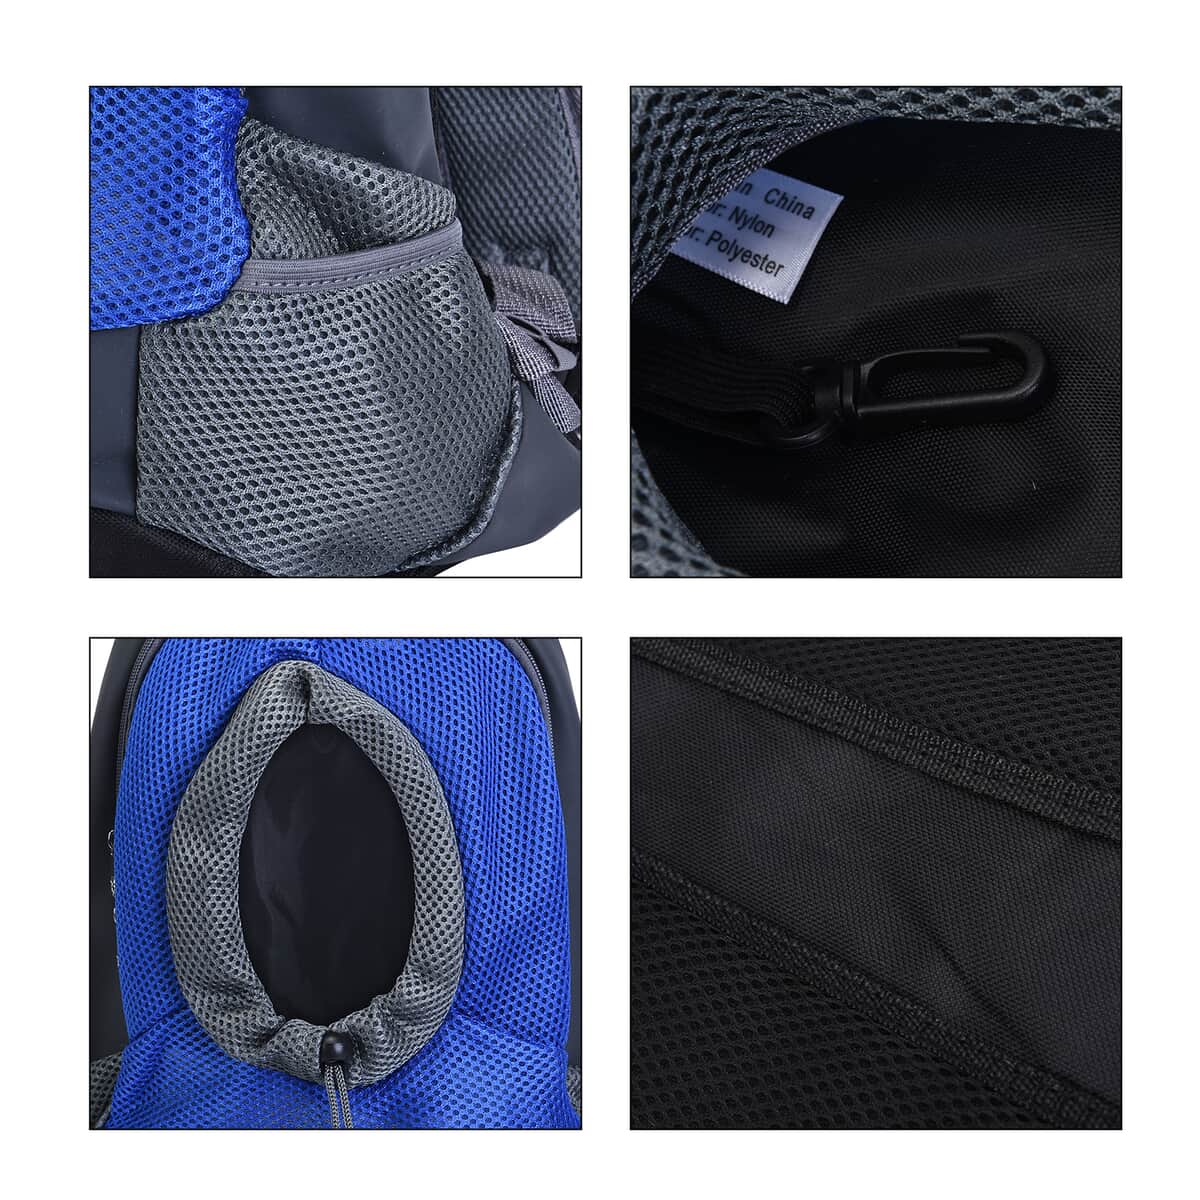 Blue and Grey Nylon Pet Bag (15.74"x12.6"x6.3") with Adjustable Padded Straps image number 4